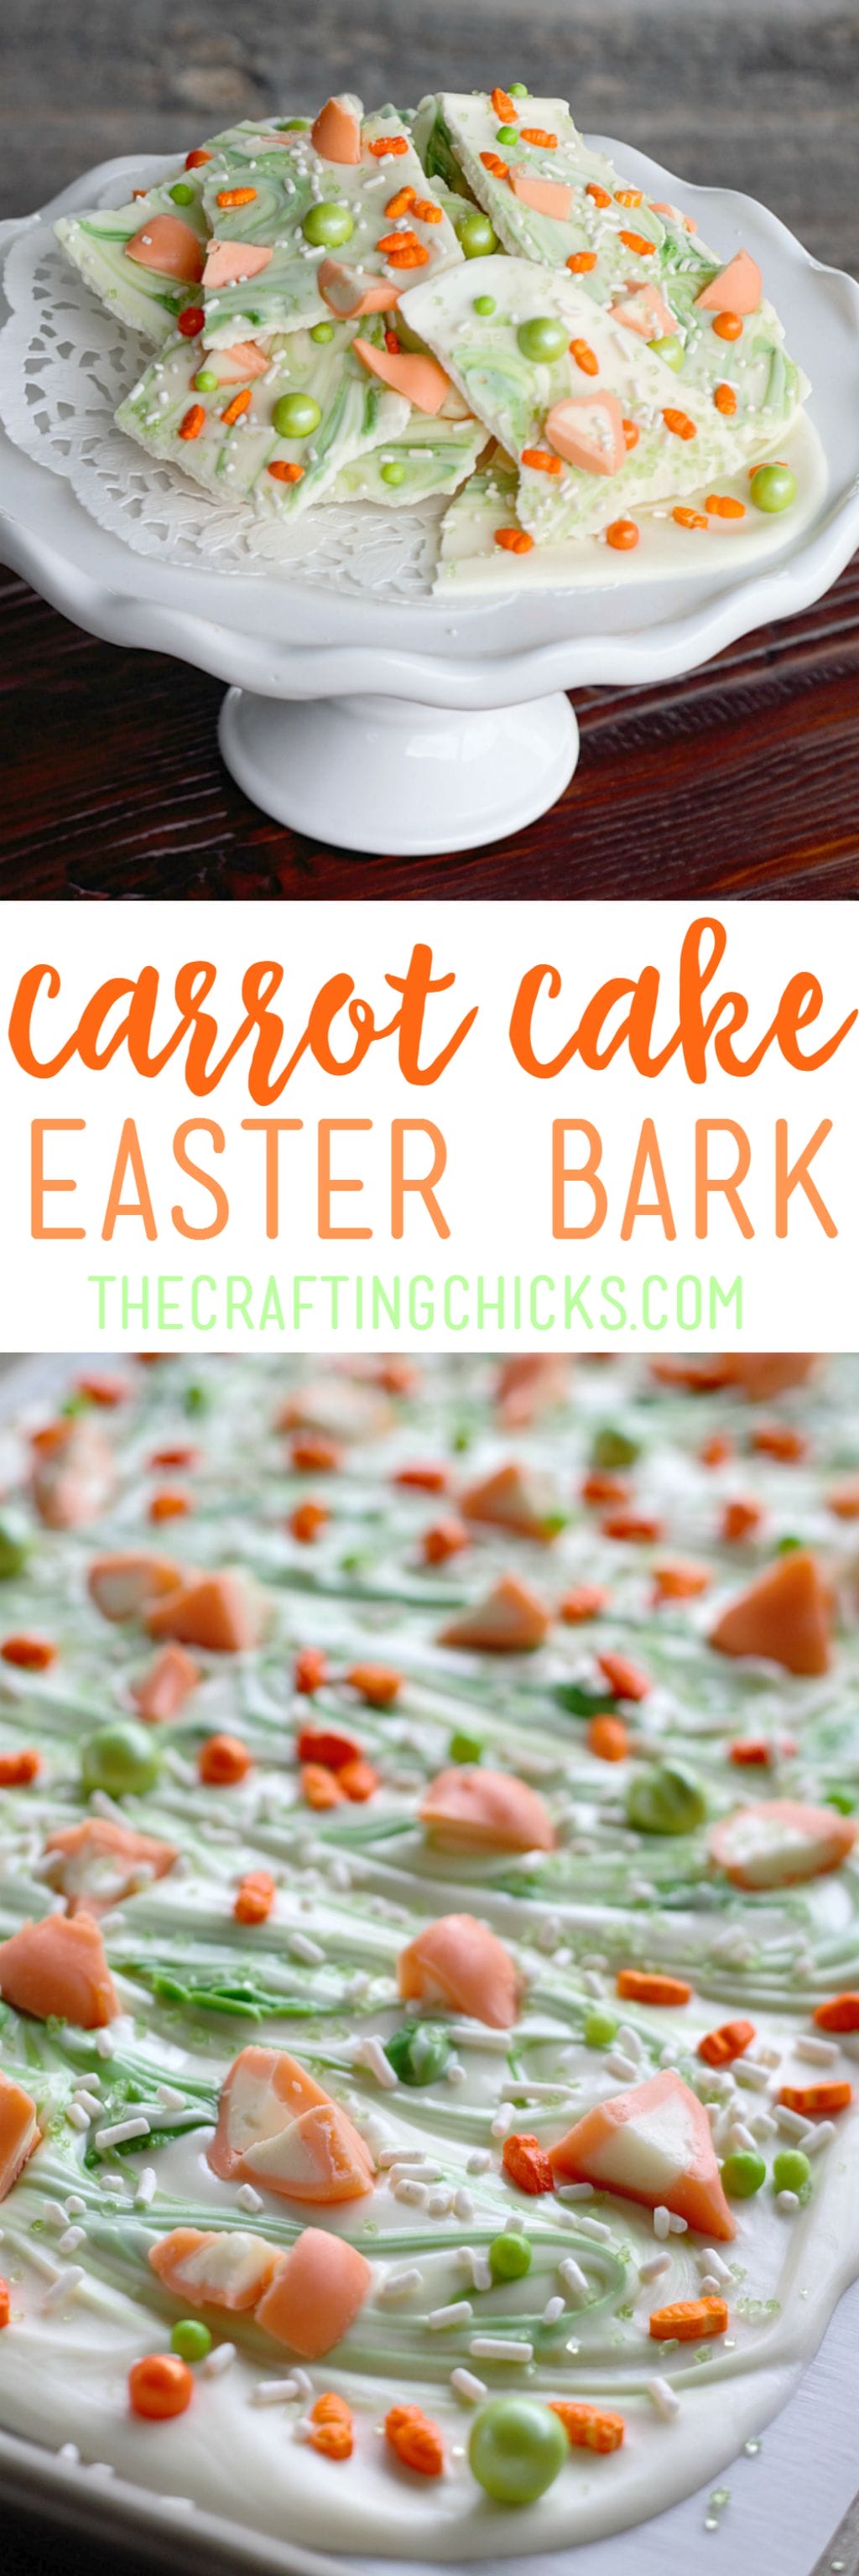 Carrot Cake Easter Bark is an easy, no-bake Easter dessert that is perfect to make with the kids!